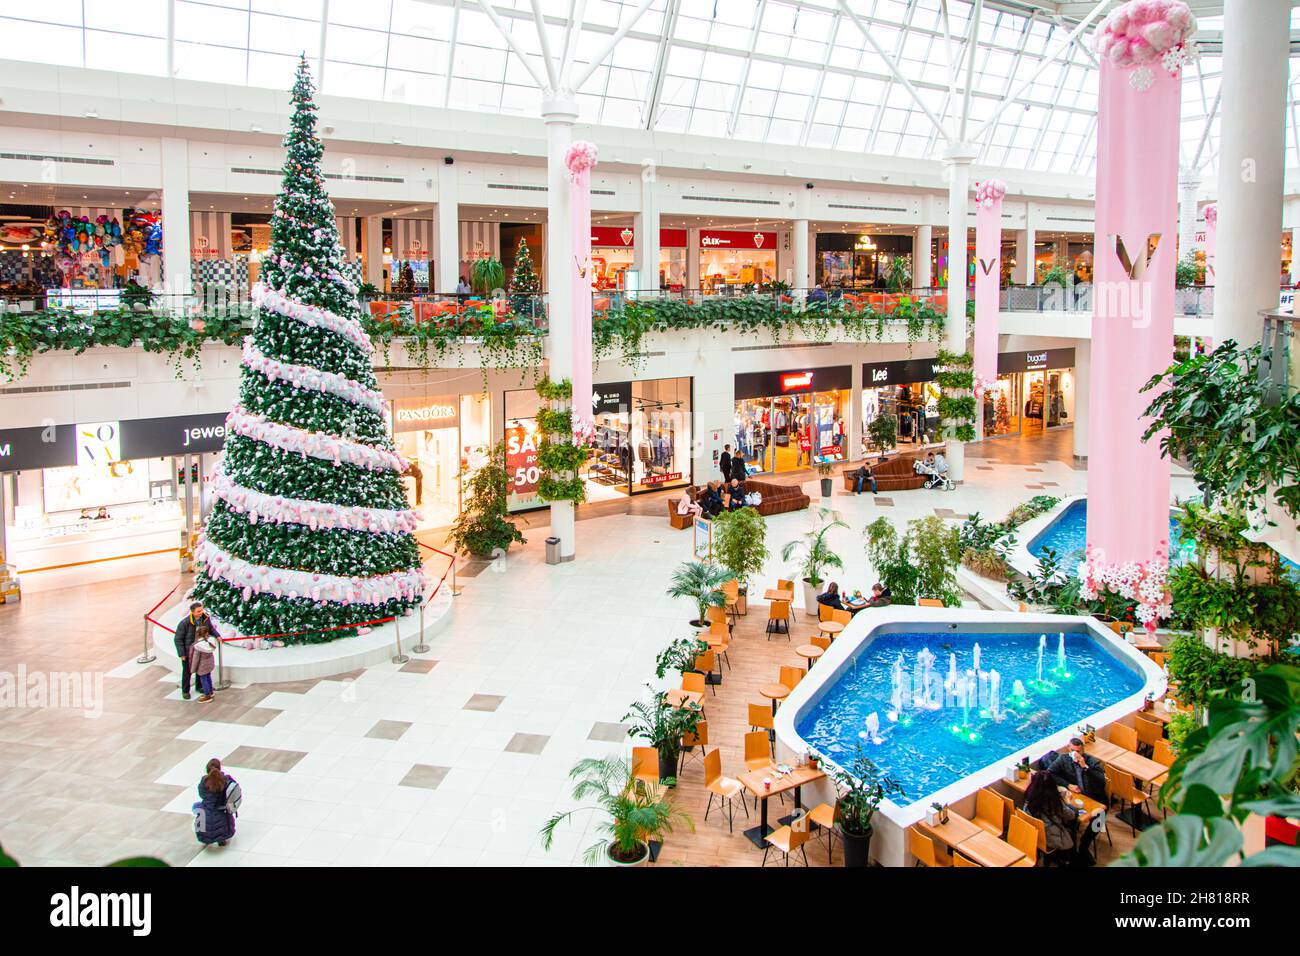 Victoria Gardens  The largest in the Western Ukraine shopping mall